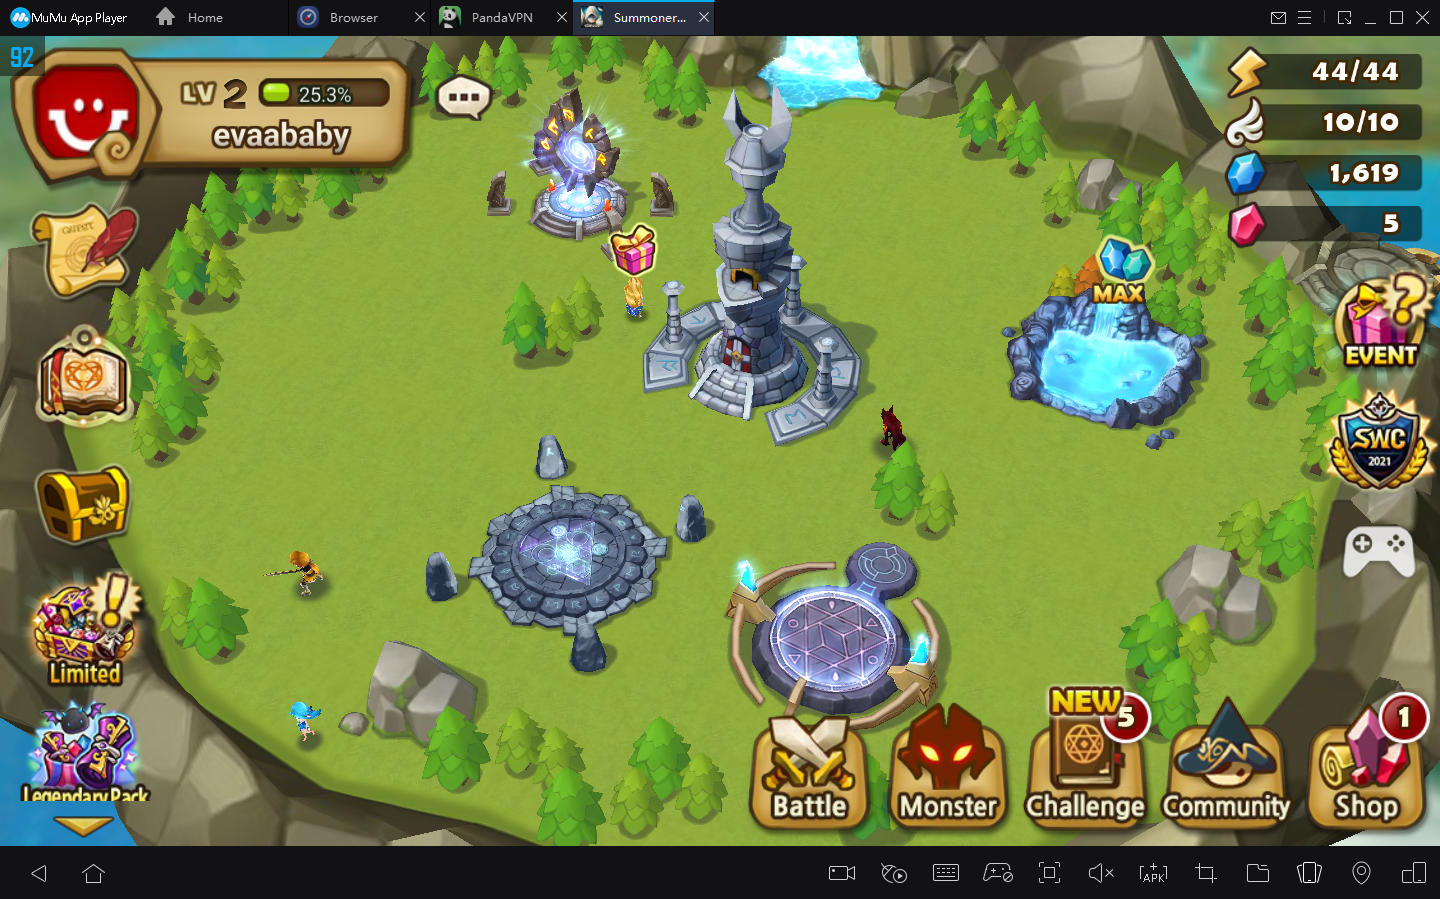 Summoners War: Has Released a Brand New 2vs2 Battle Mode6